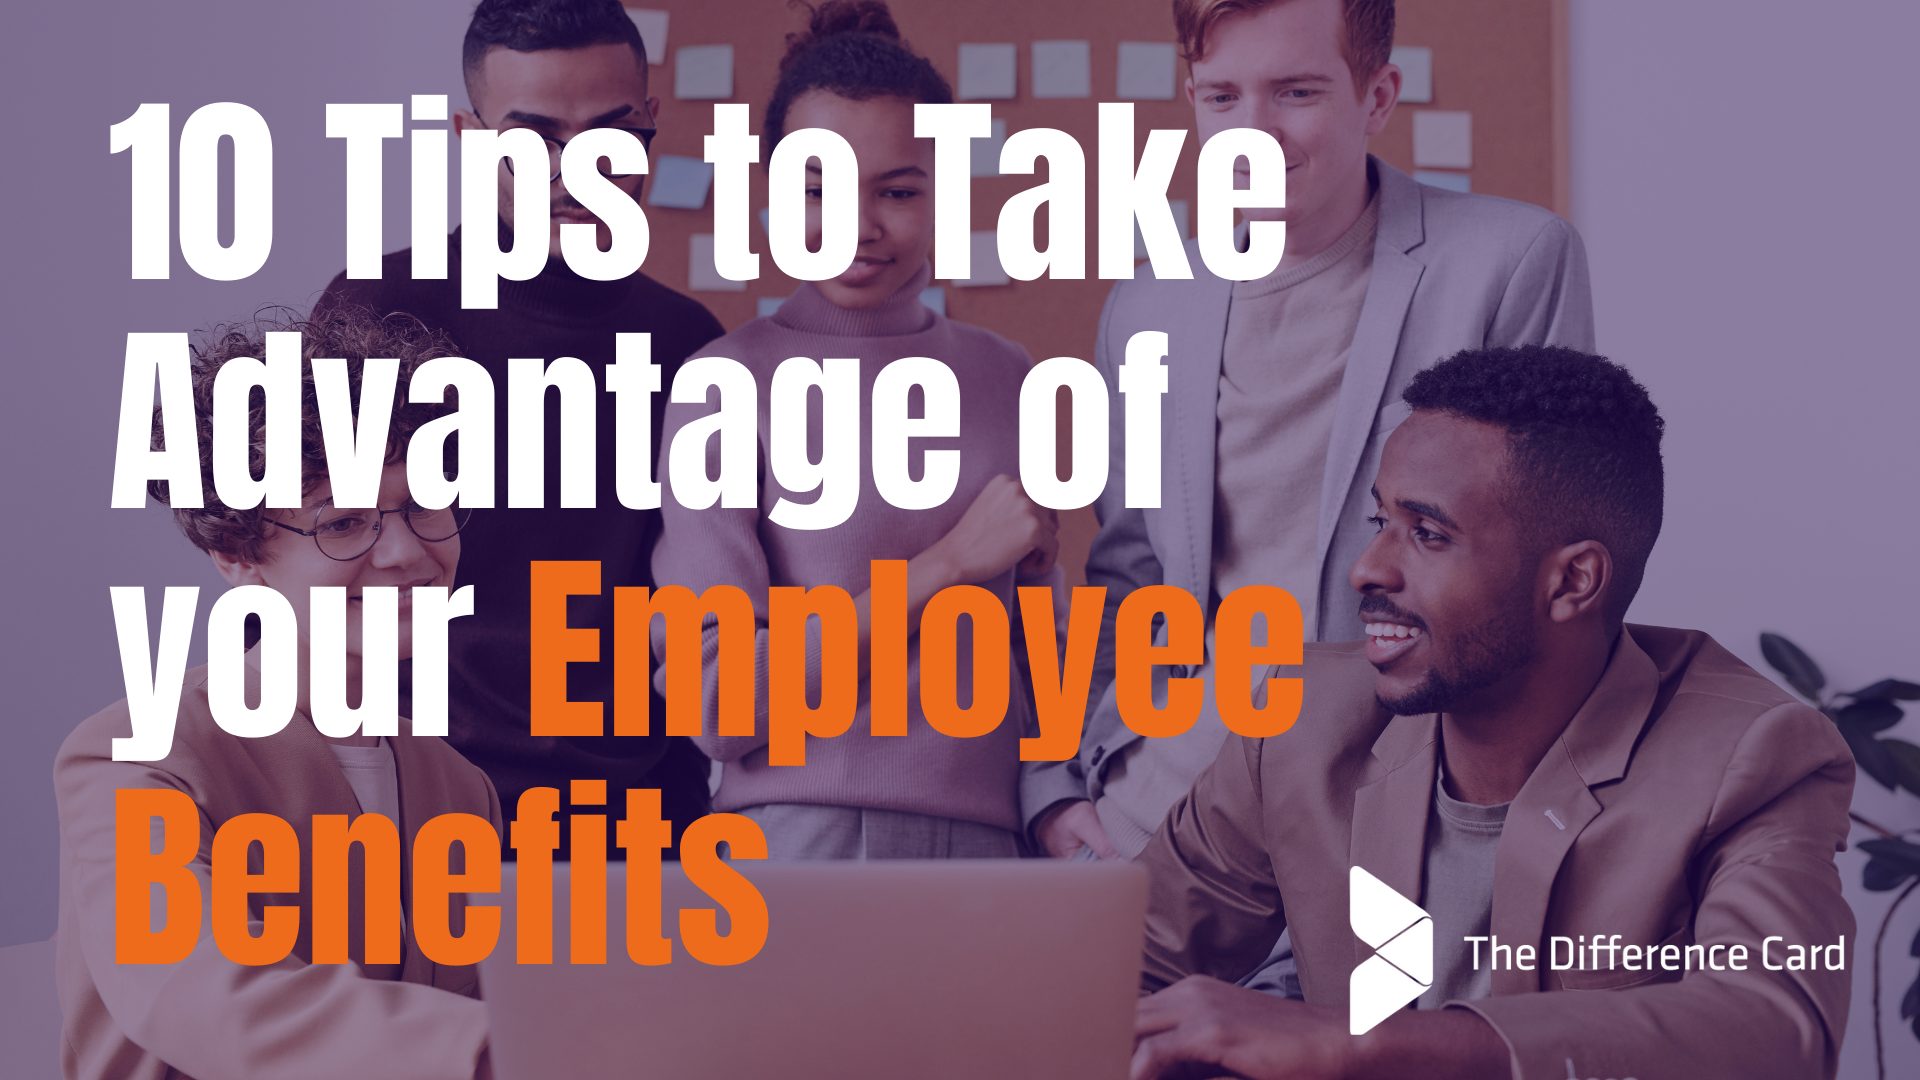 10 Tips on How to Make the Most of Your Employee Benefits